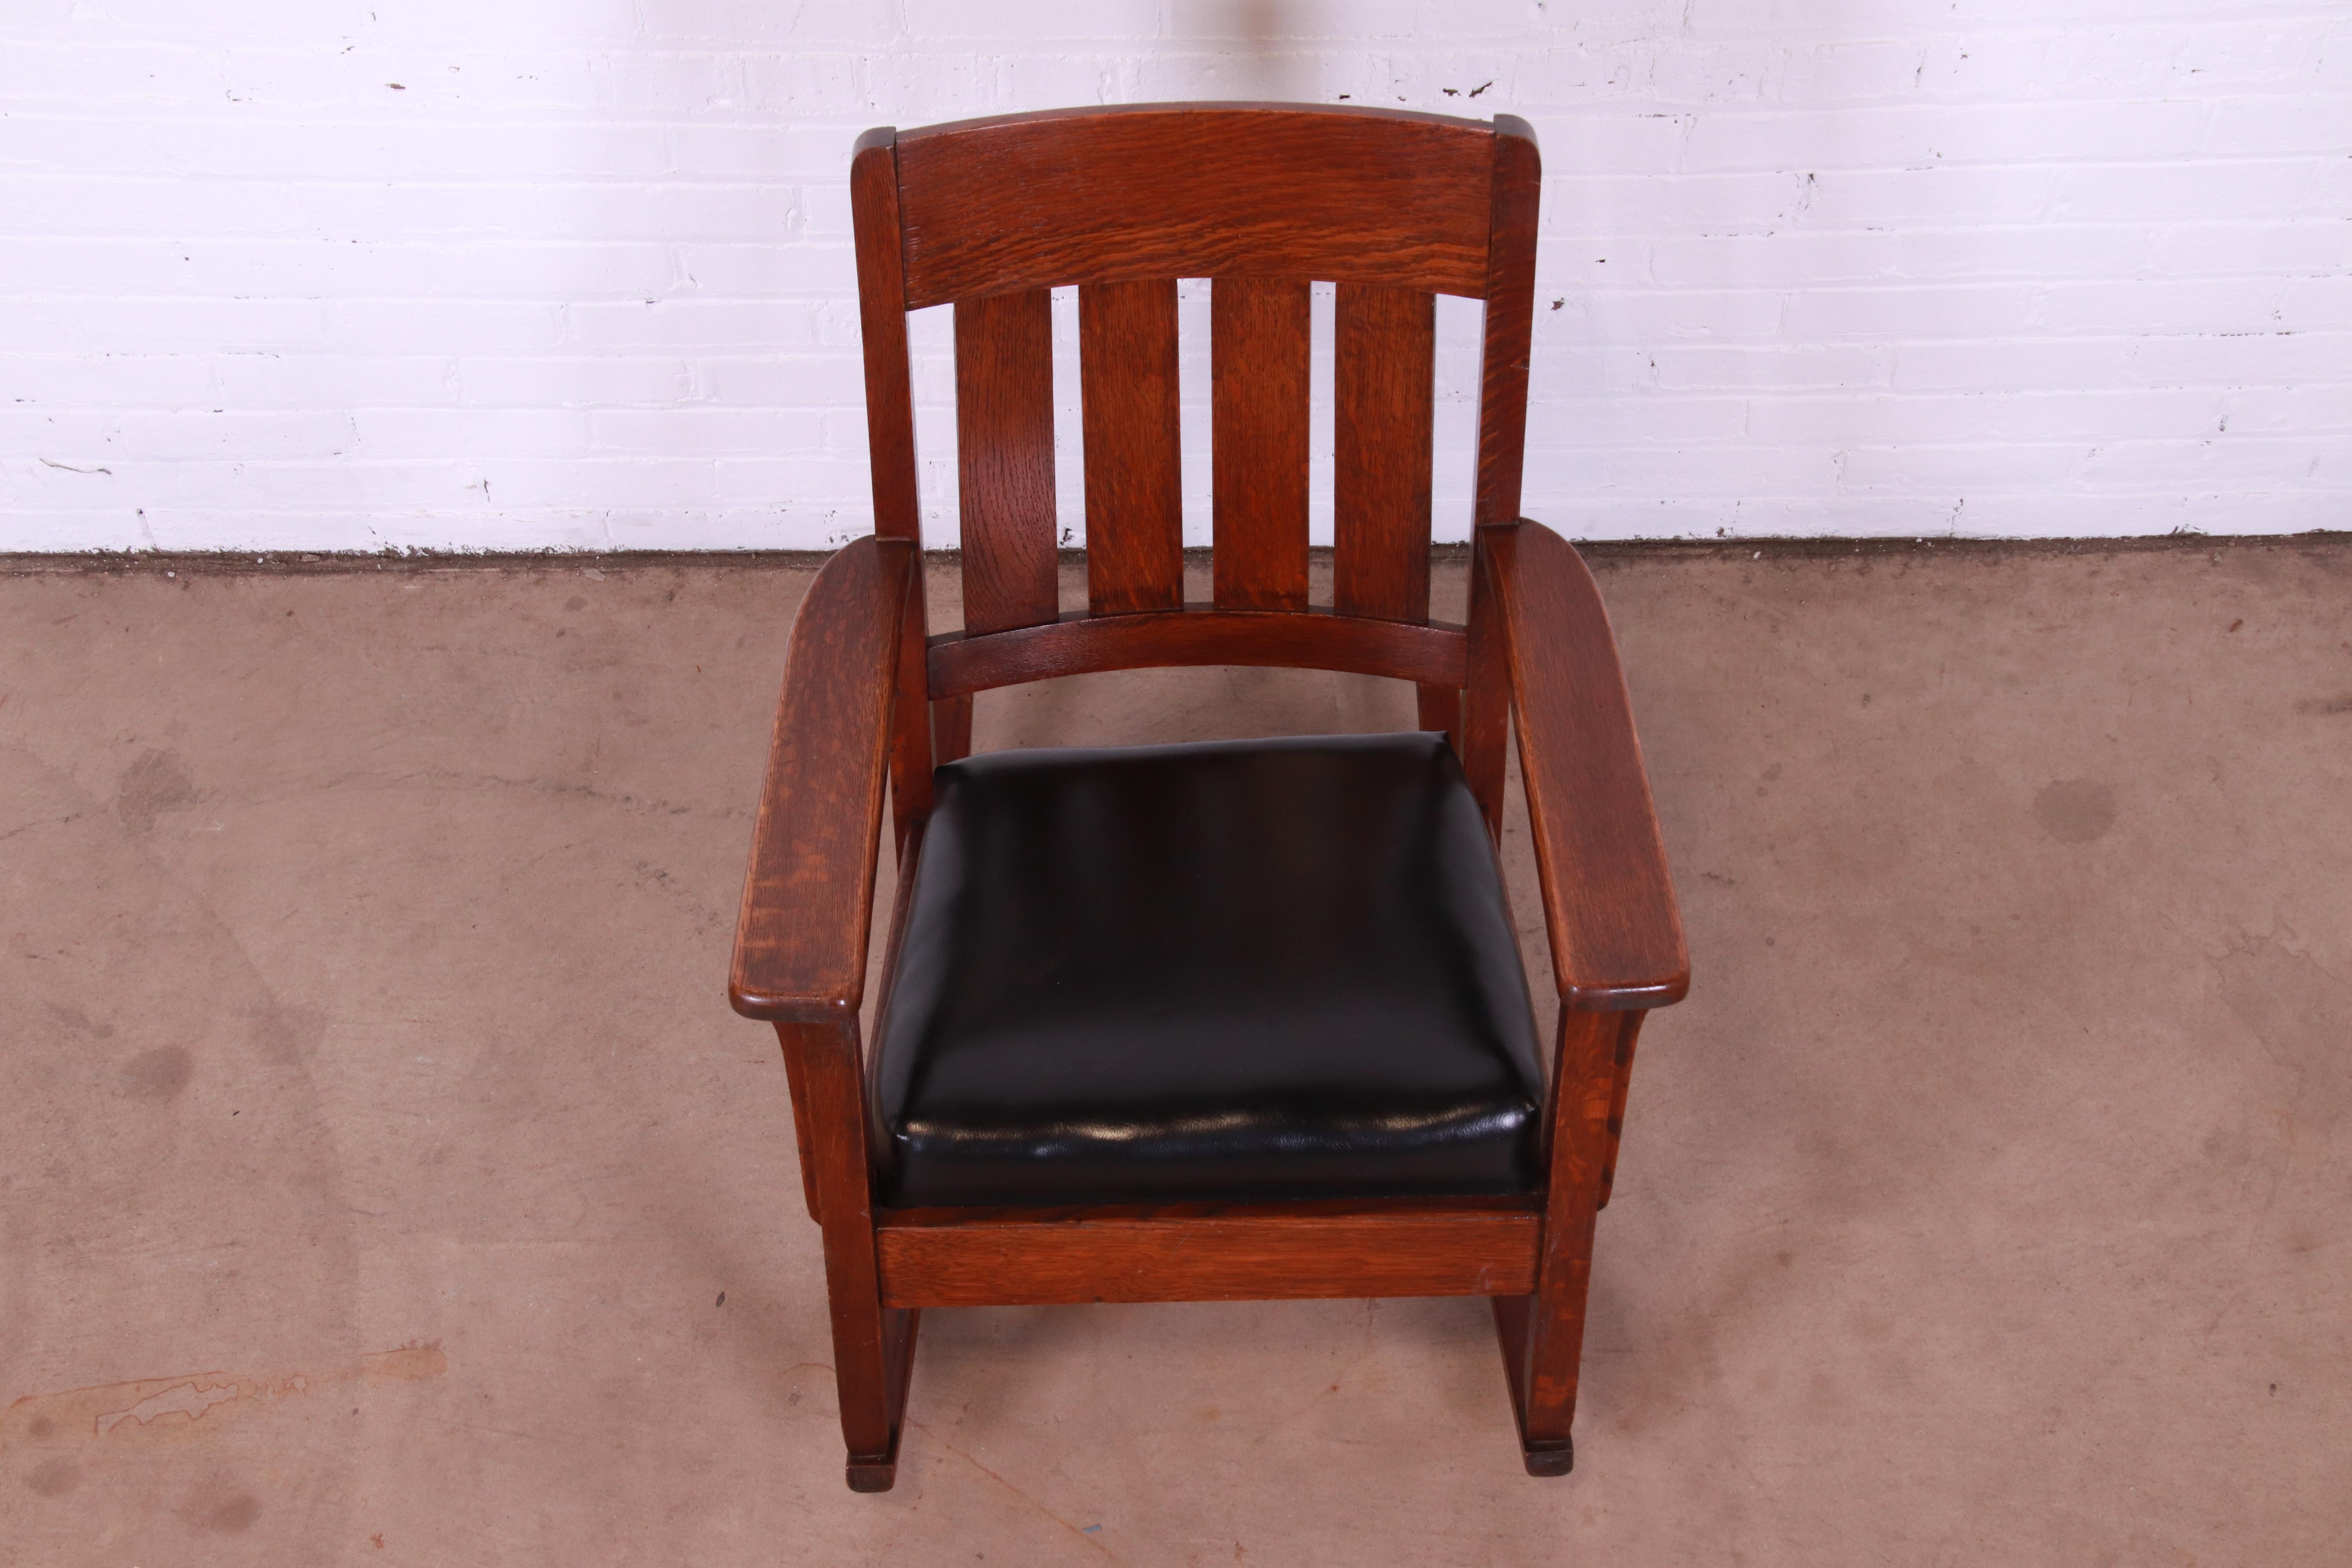 20th Century Stickley Style Arts & Crafts Oak and Leather Rocking Chair, Circa 1900